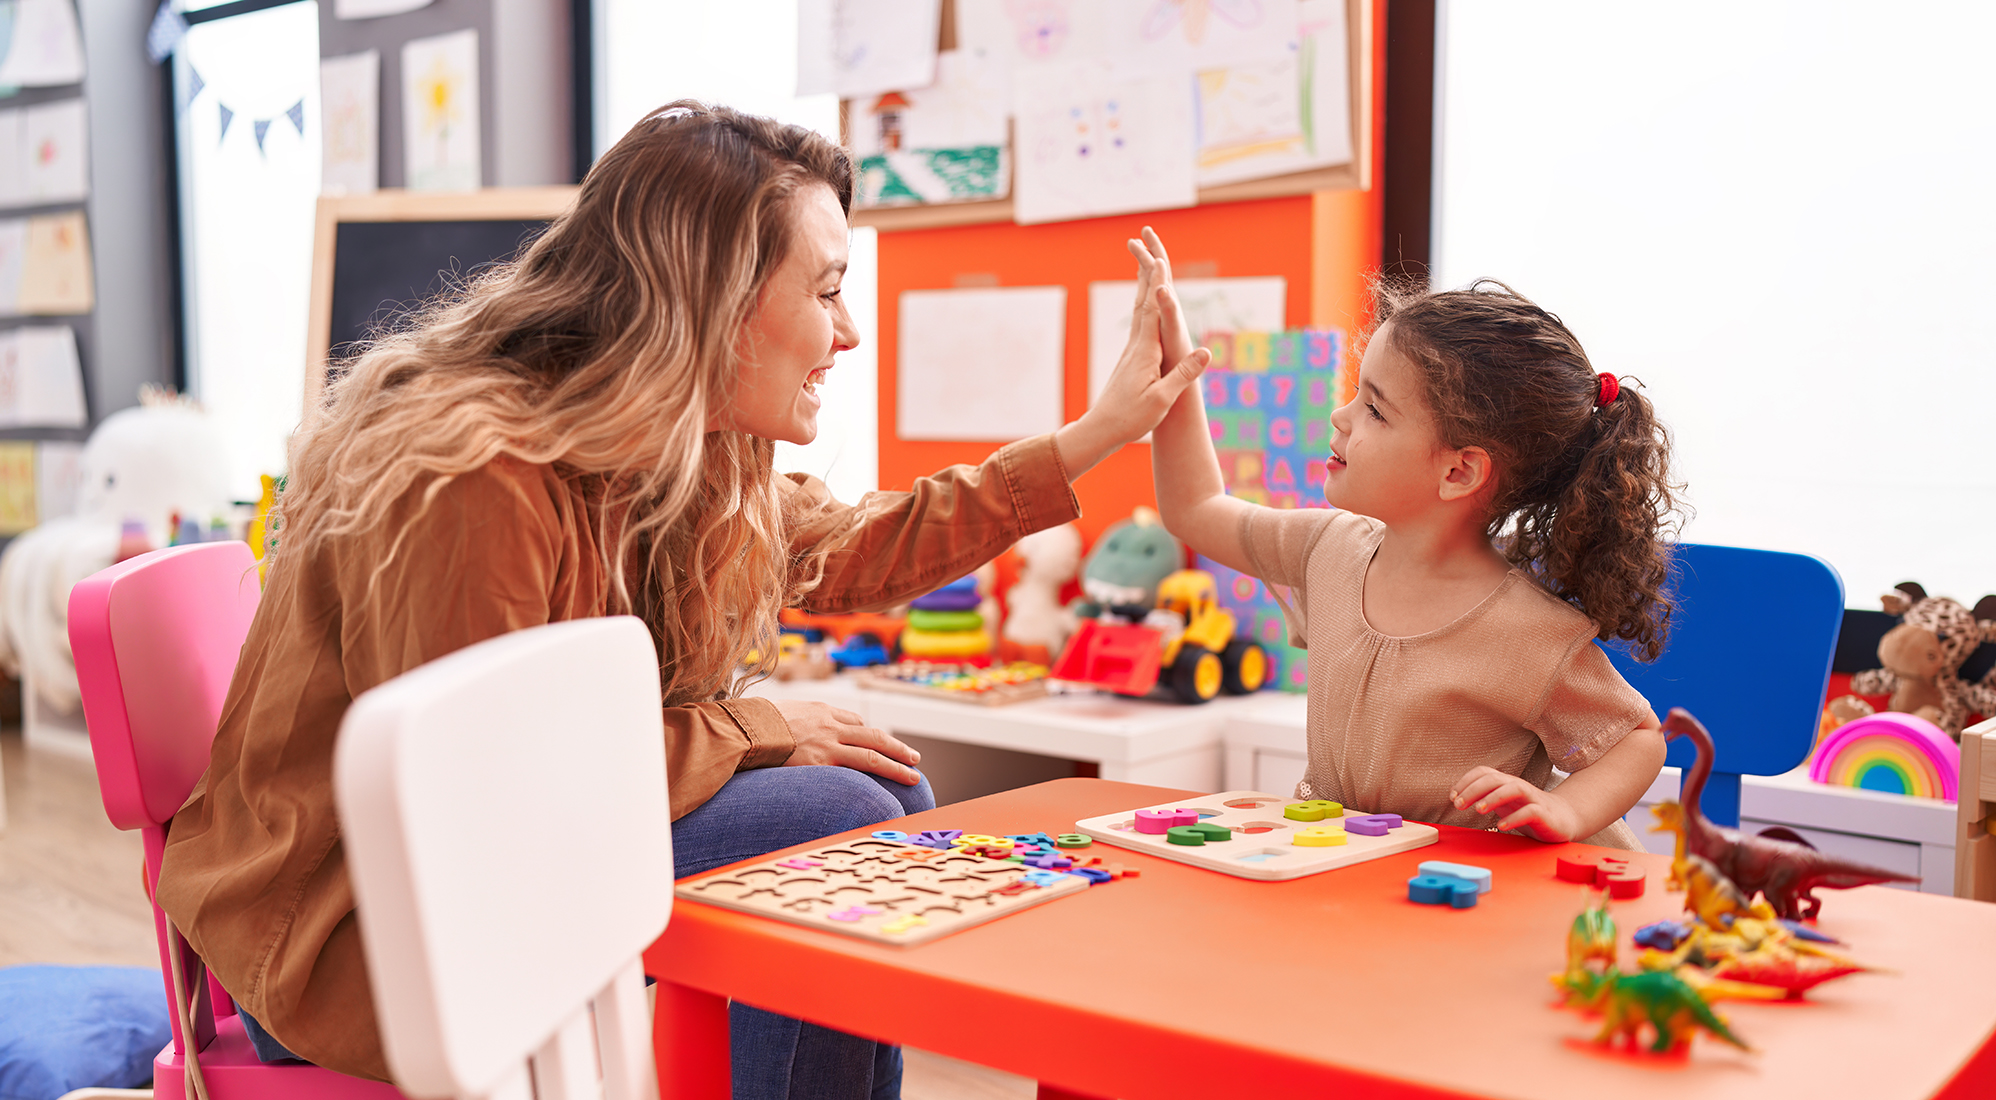 A female daycare worker high fives an adorable child in a daycare setting with lots of toys